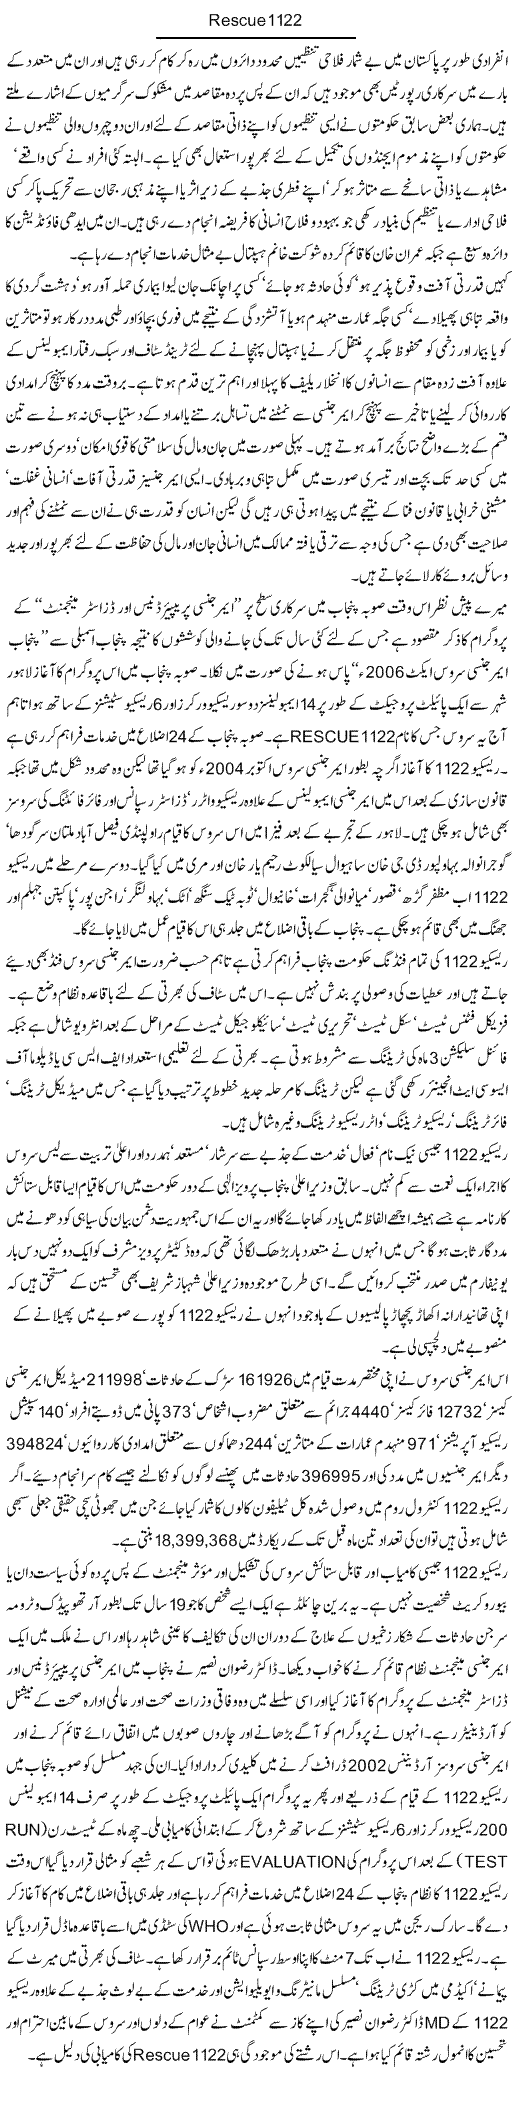 Rescue 1122 Express Column Hameed Ahmed 17 March 2010